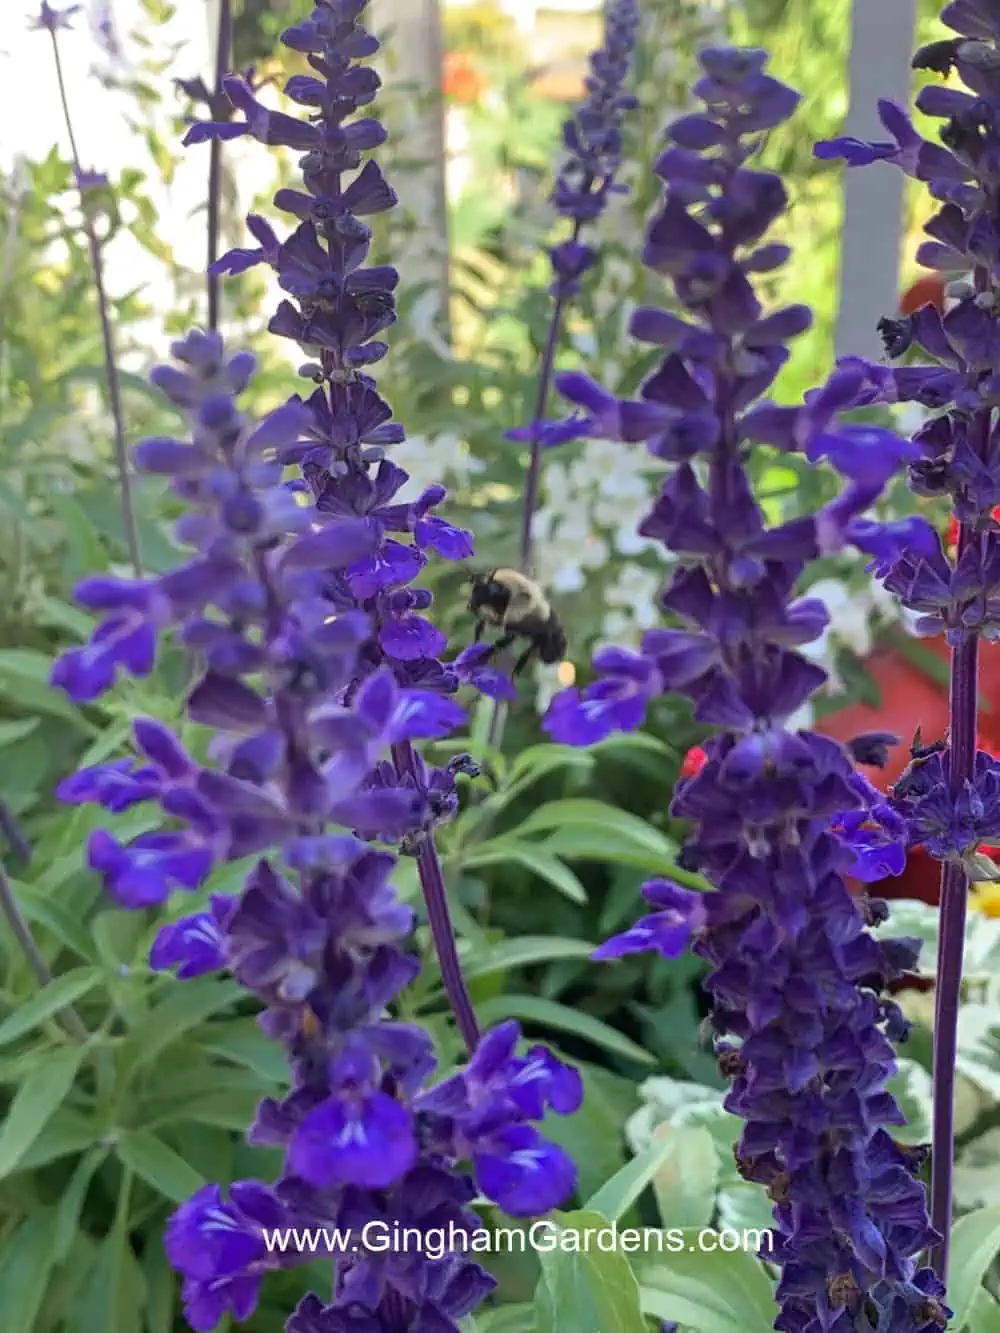 Bee on Victoria Blue Salvia in How to Attract Pollinators to Your Garden